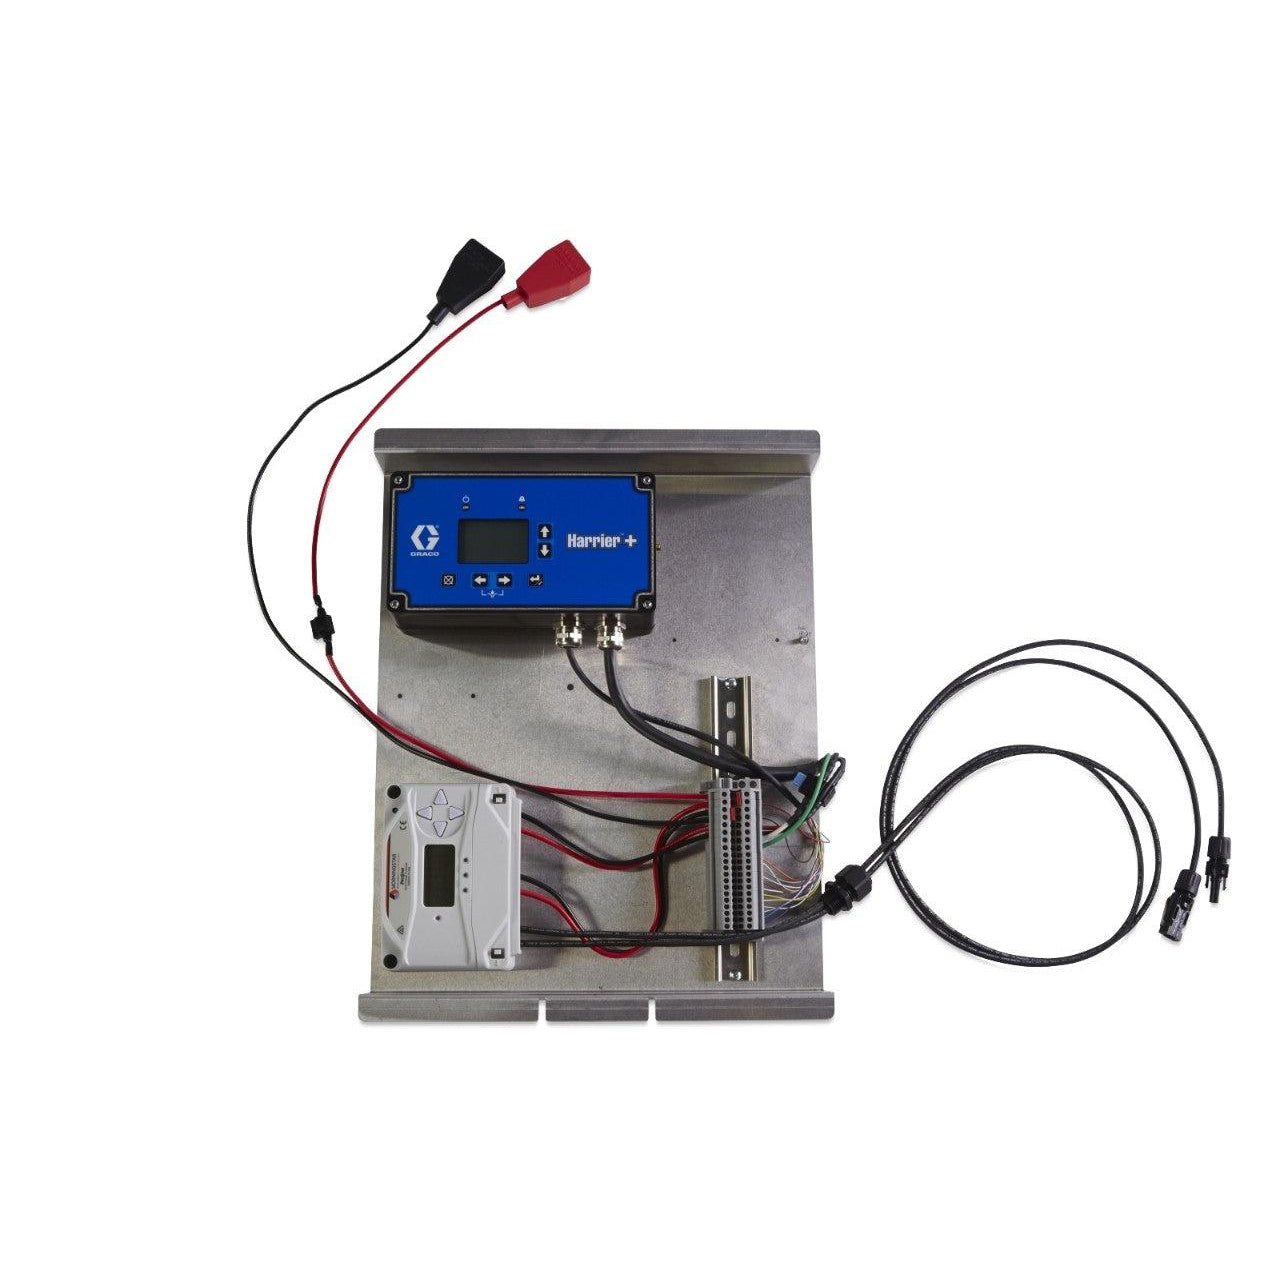 Four-Battery Control Box with Harrier+ International Controller and Includes Prostar 30 One Panel Charge Controller